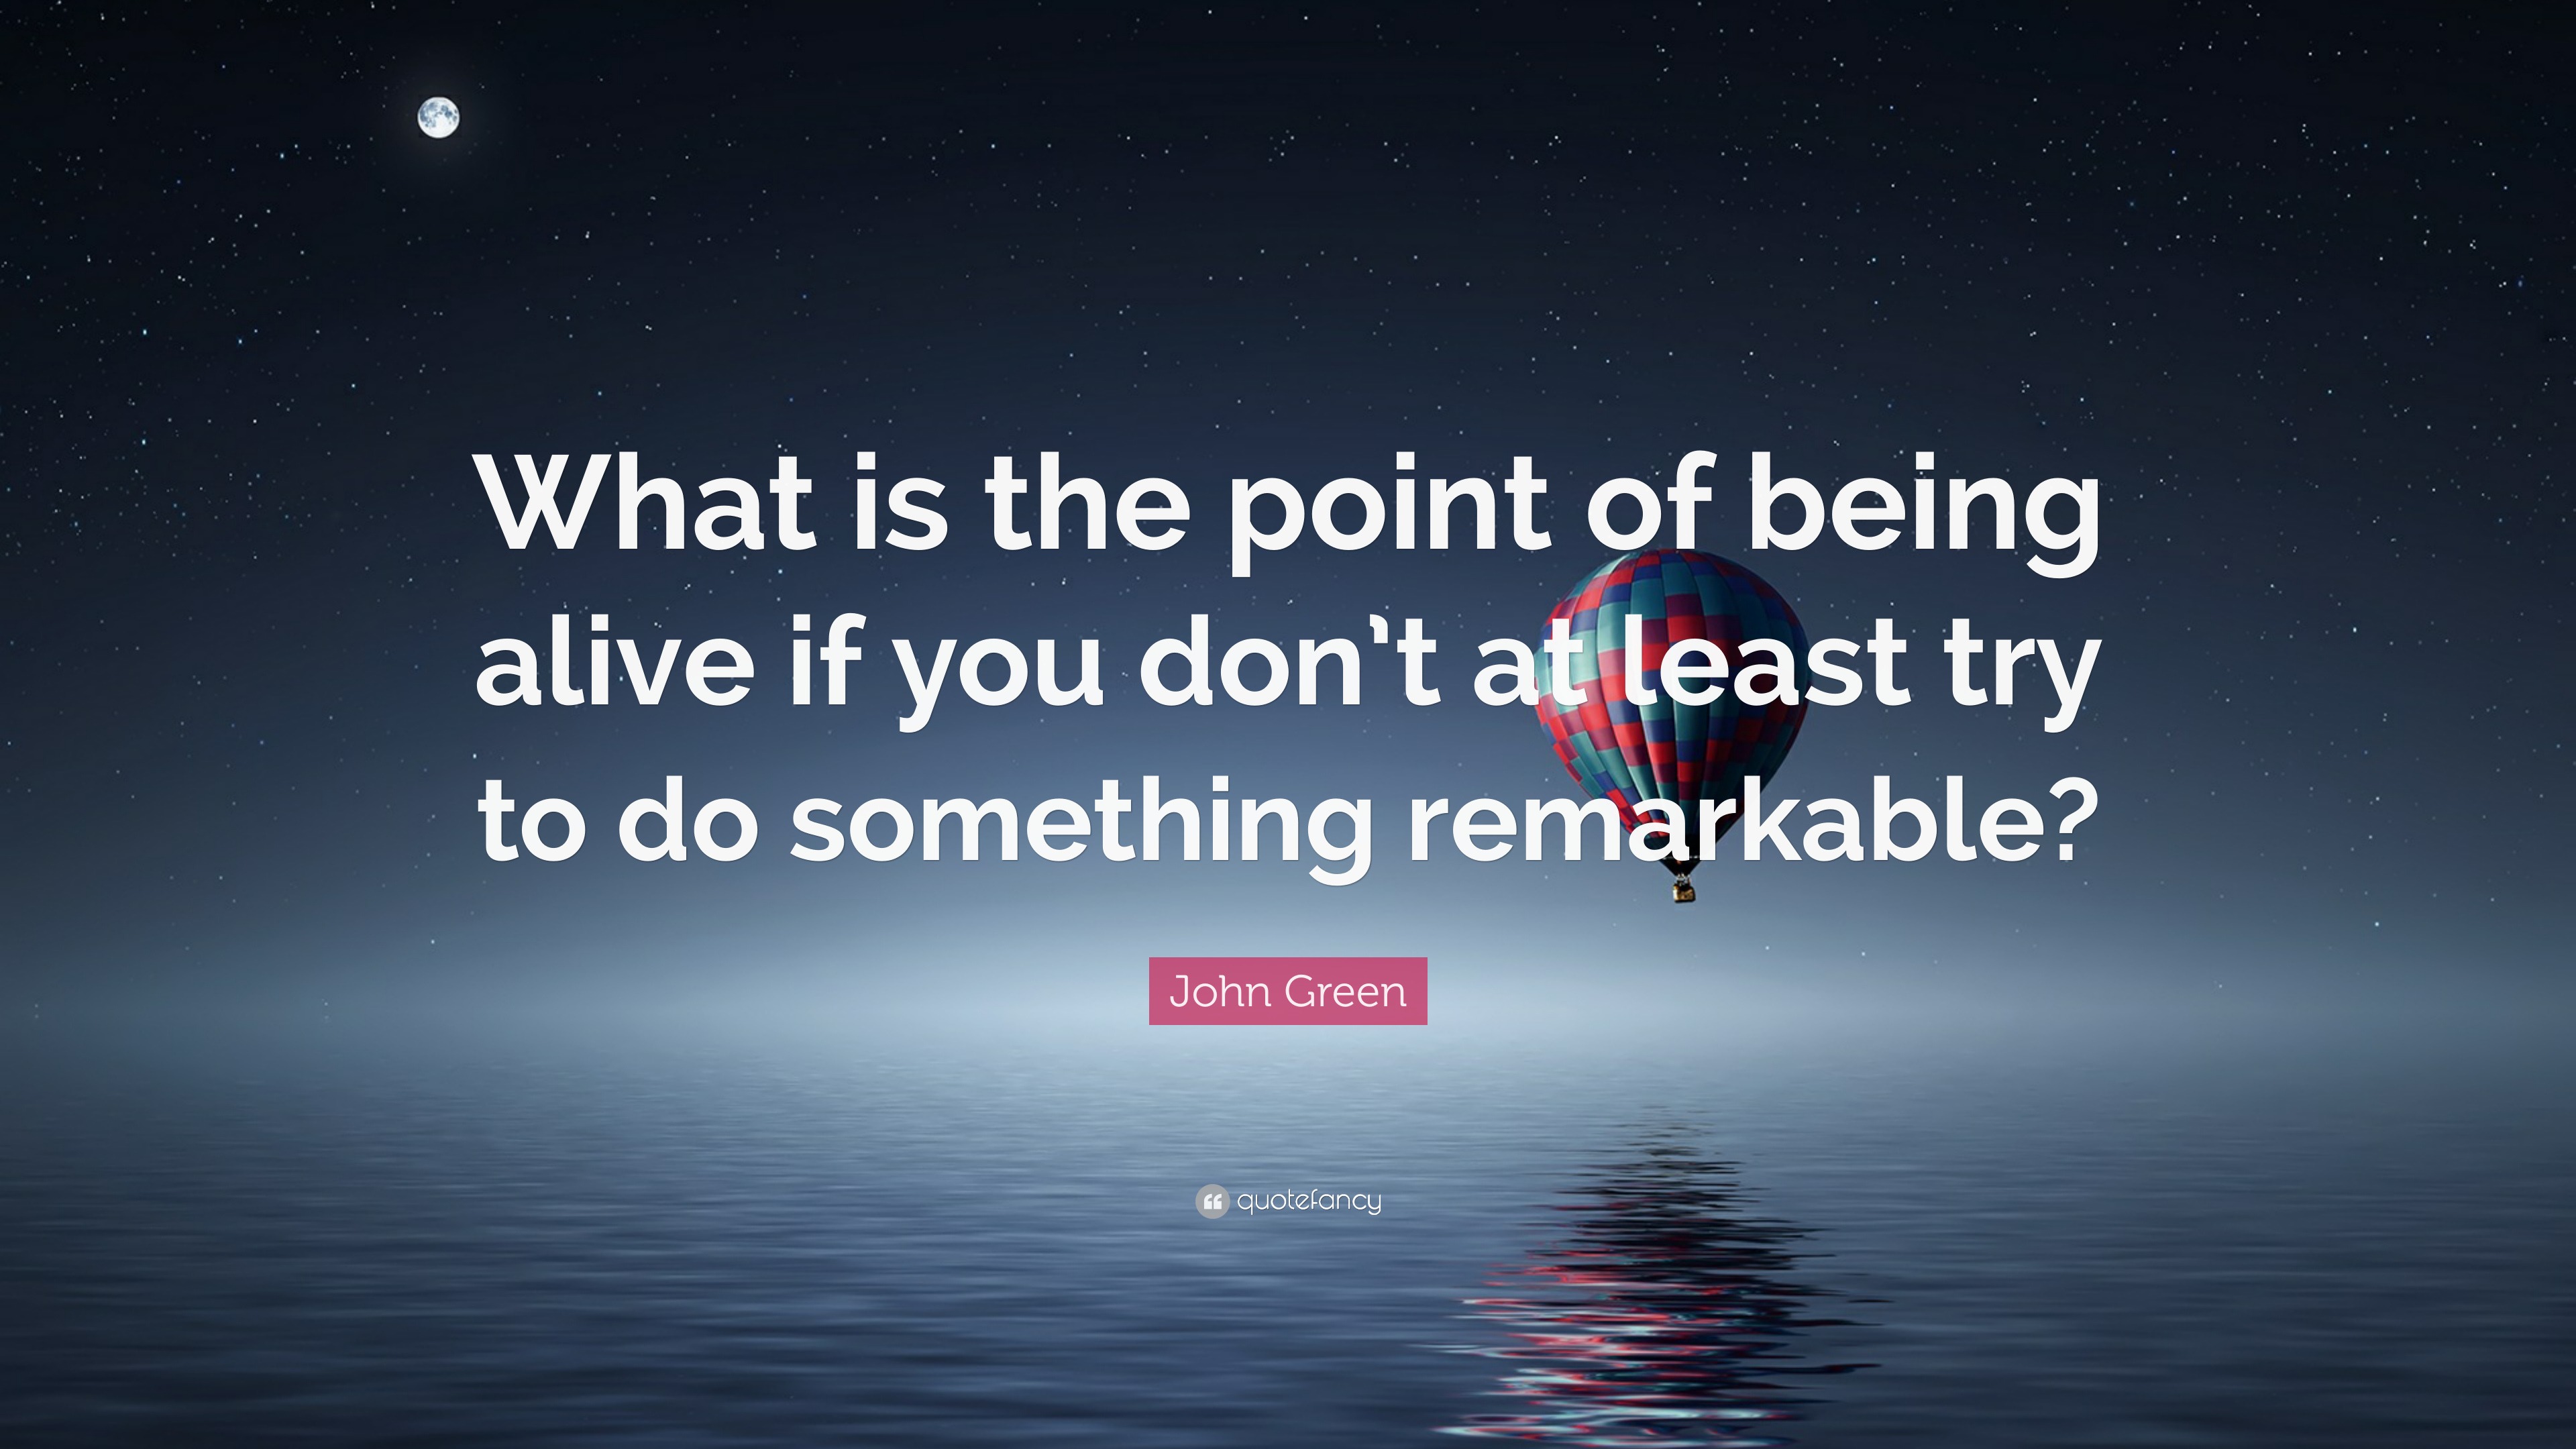 John Green Quote “What is the point of being alive if you don’t at